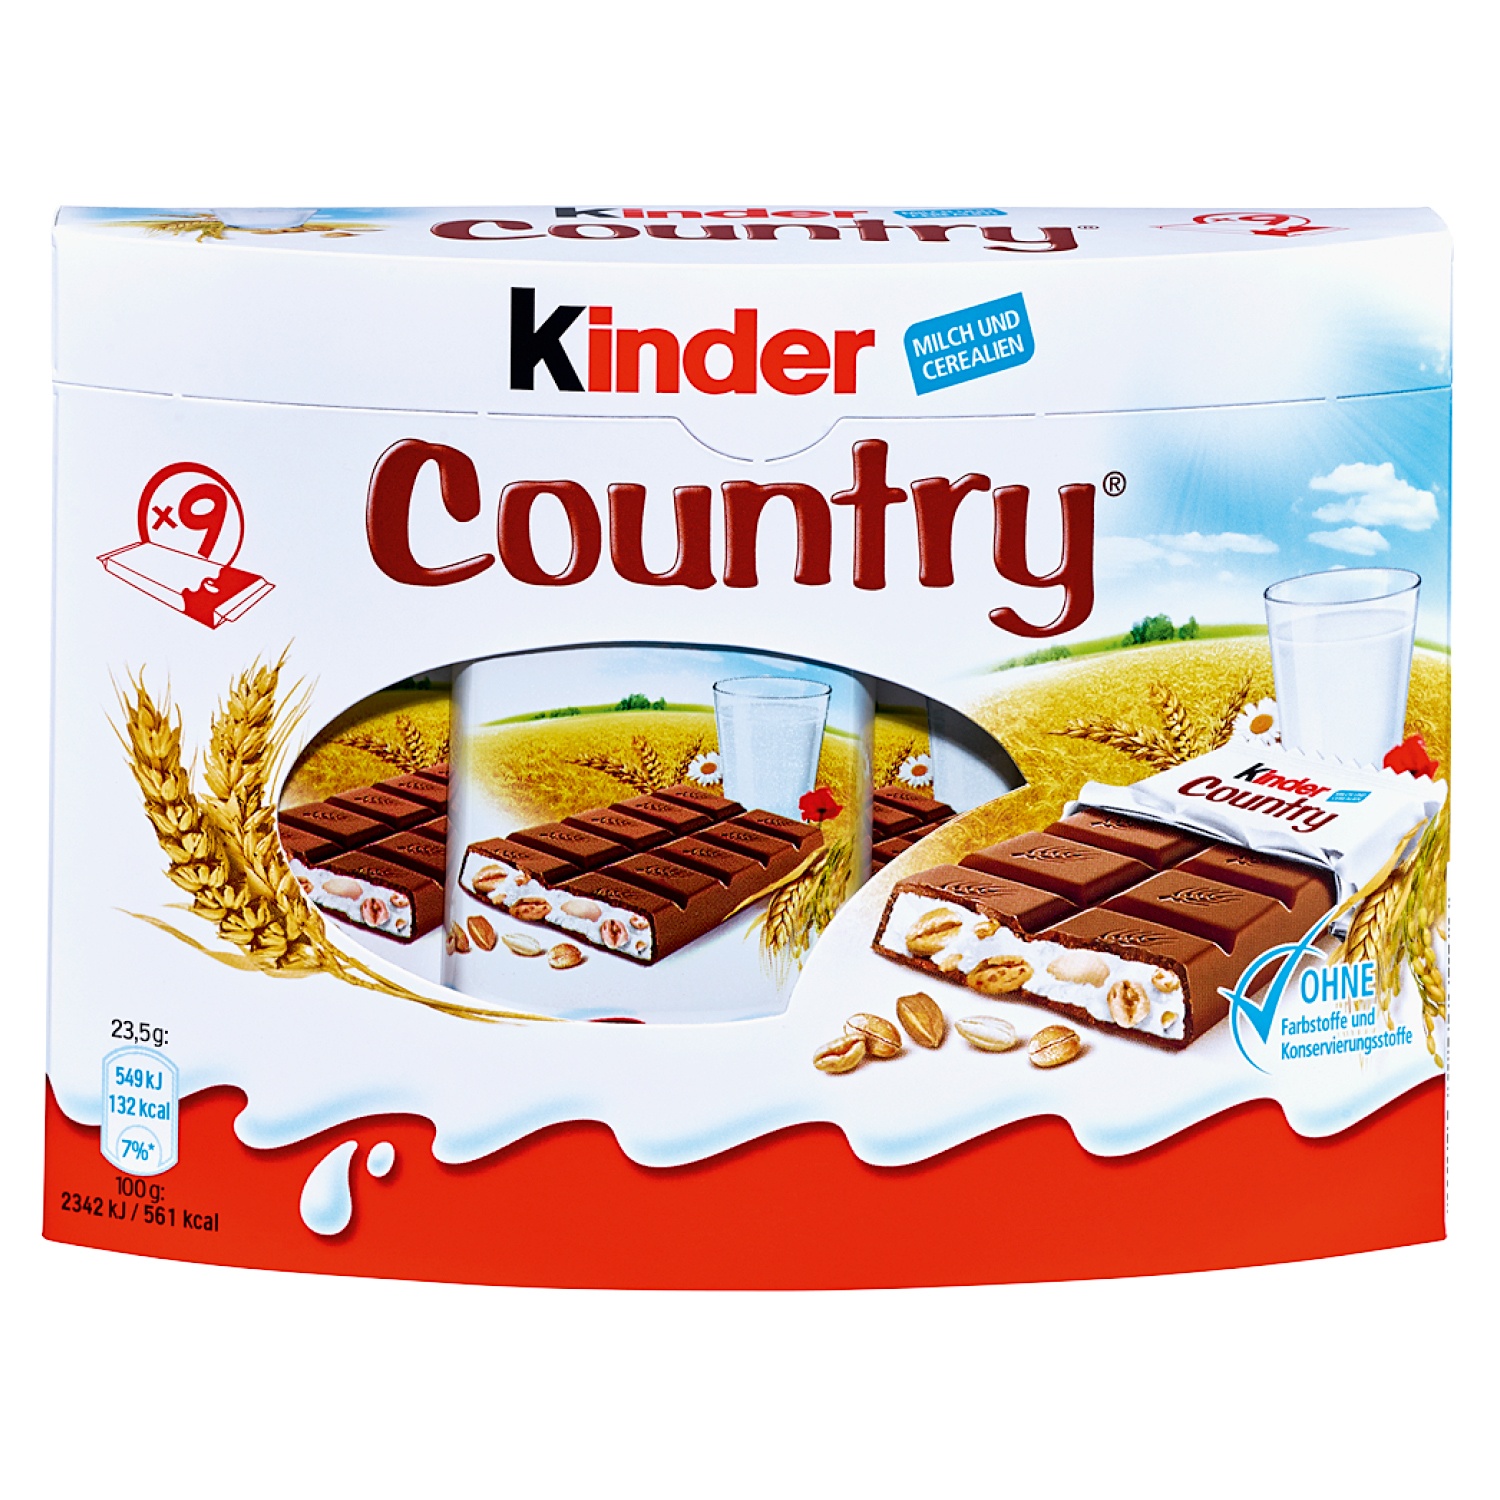 kinder Country 9x